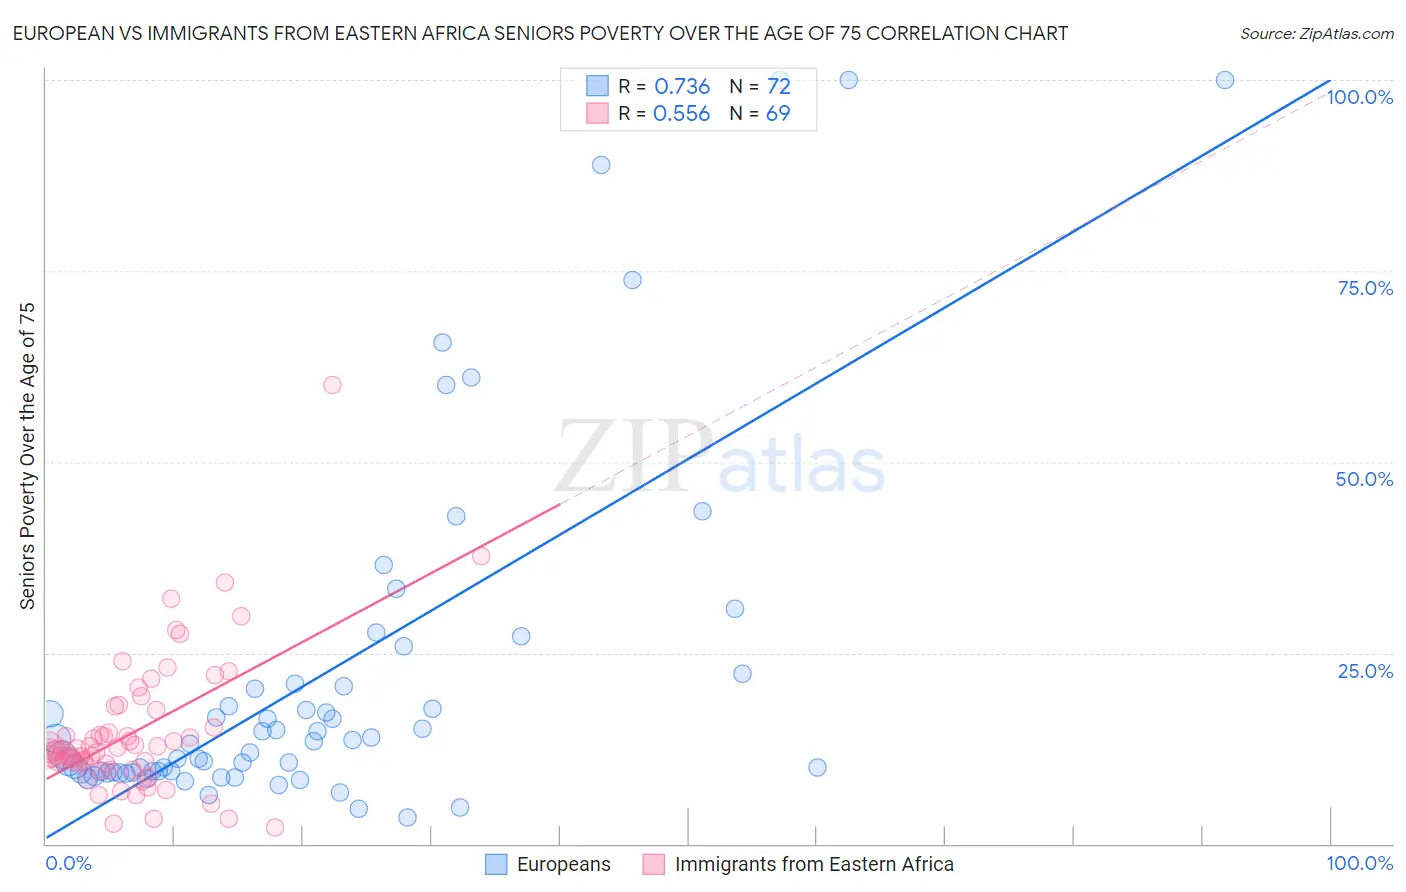 European vs Immigrants from Eastern Africa Seniors Poverty Over the Age of 75